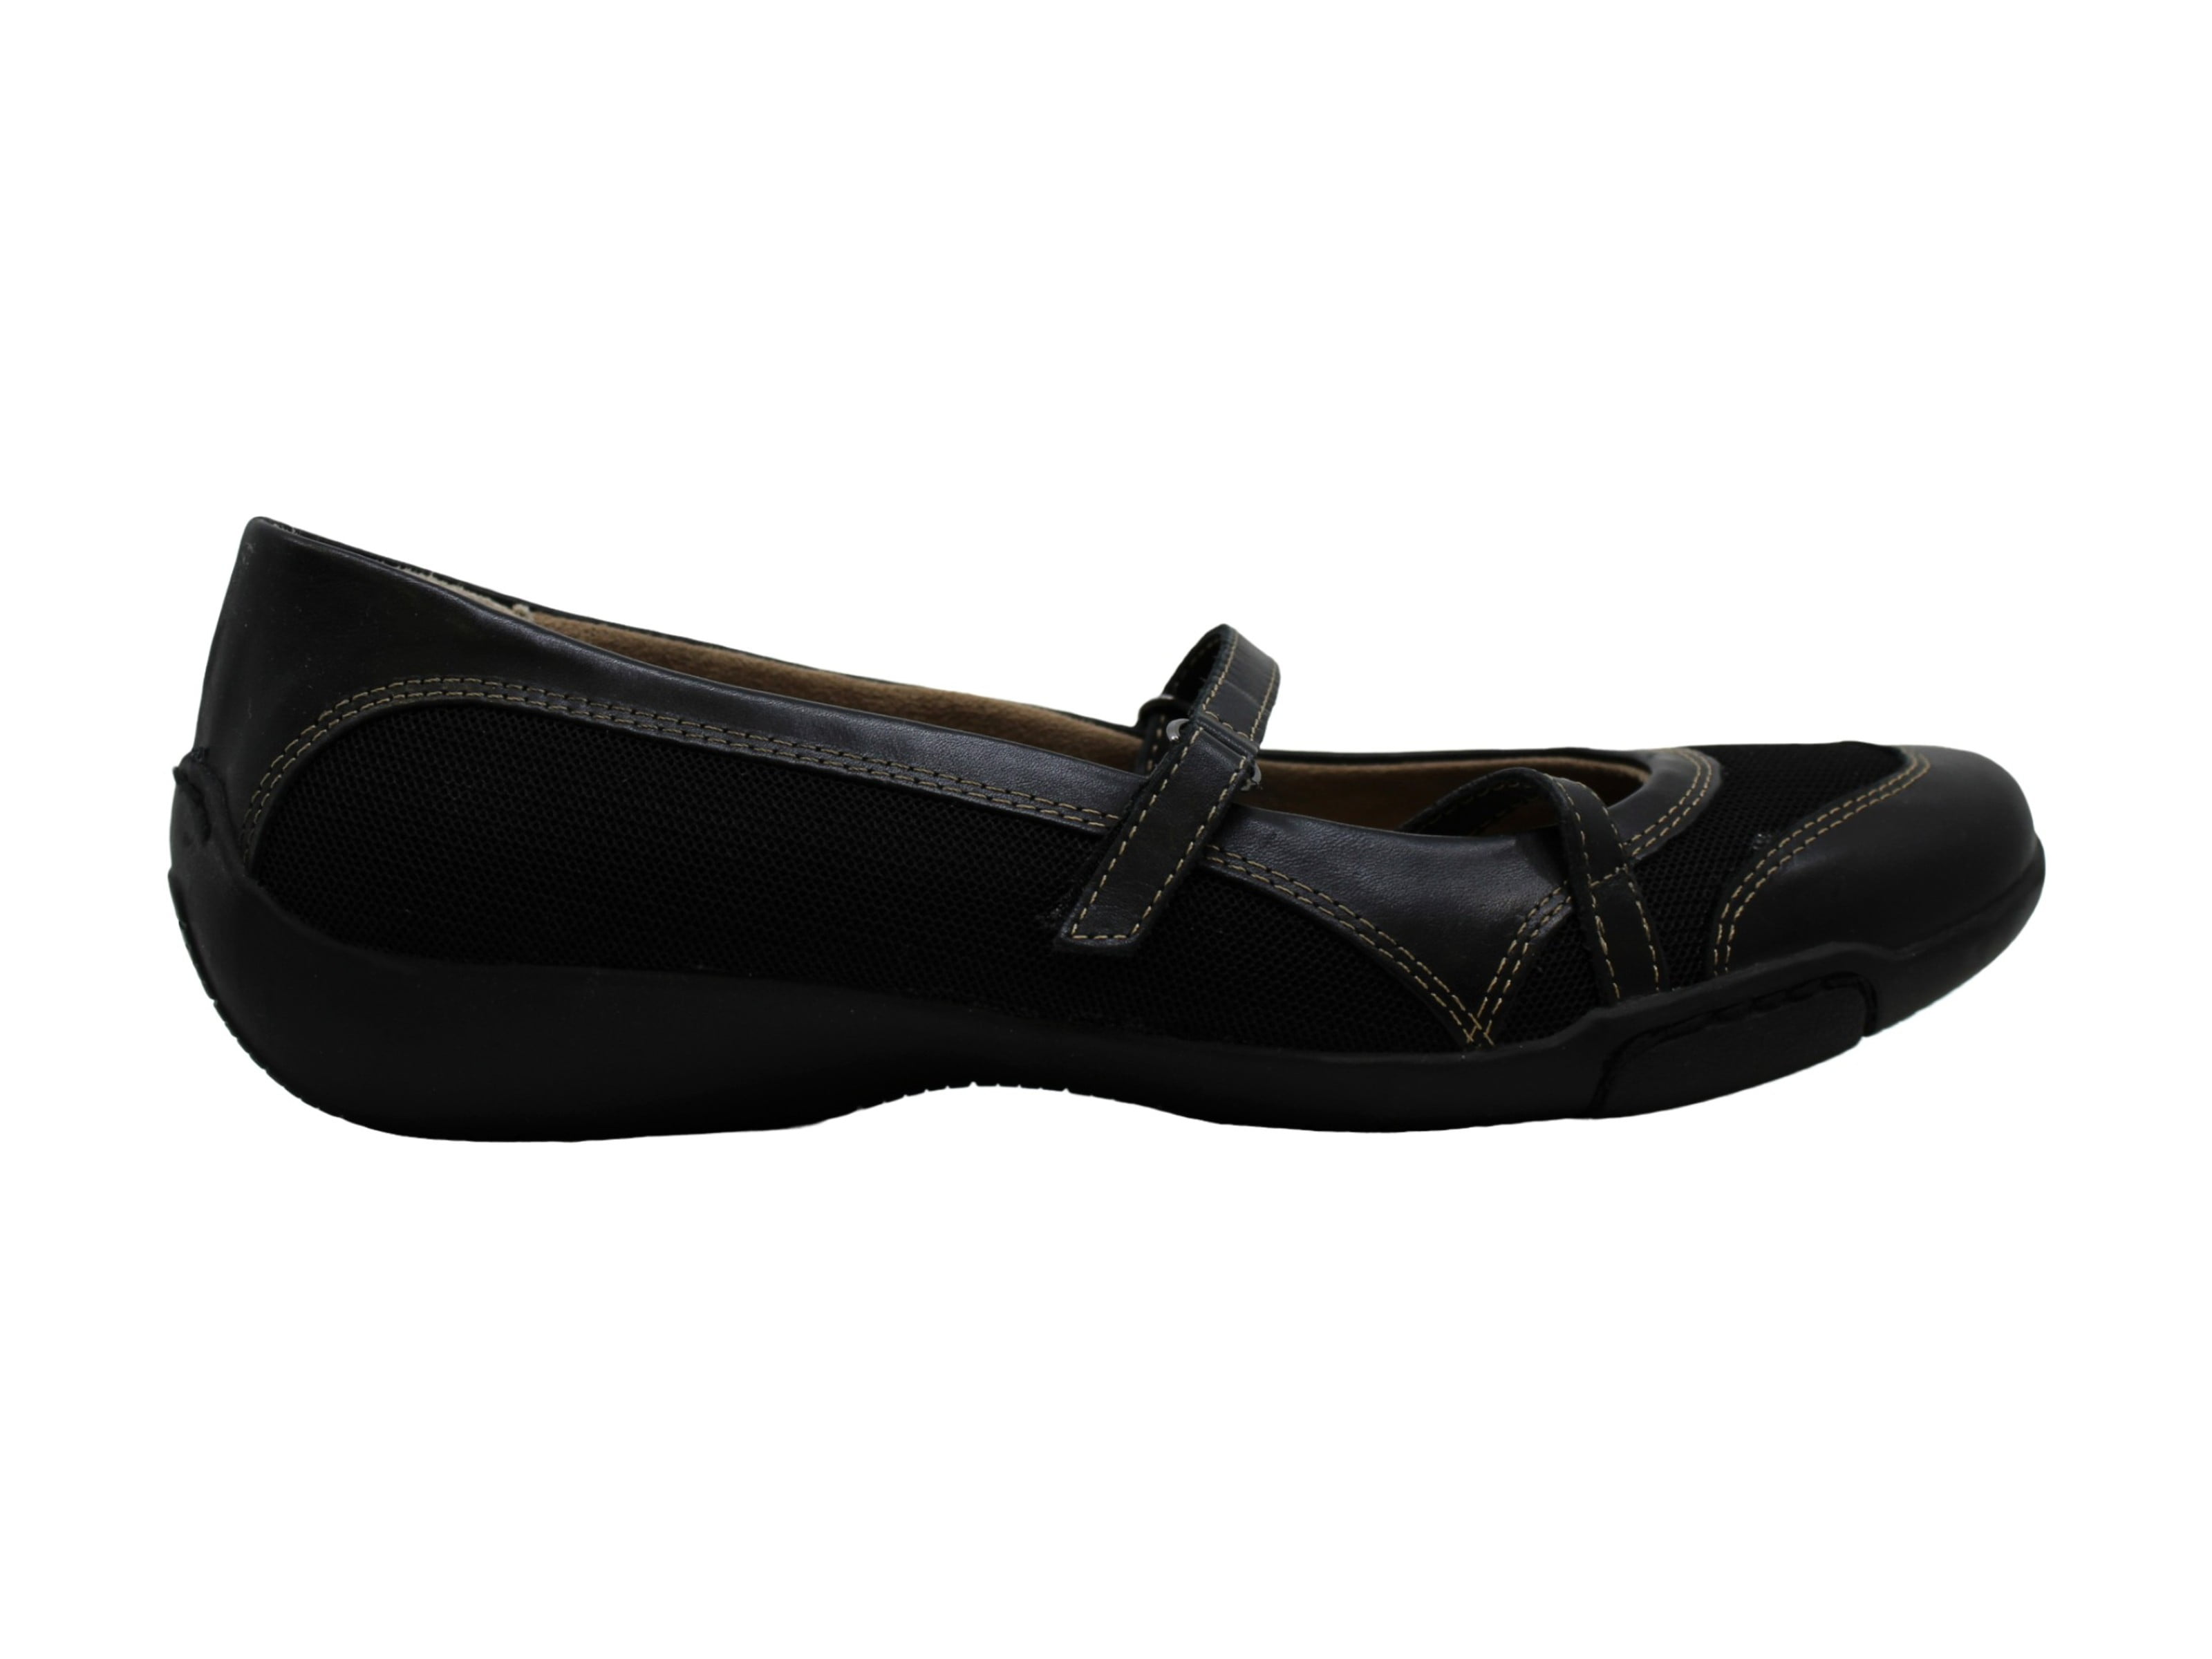 ankle strap leather loafers